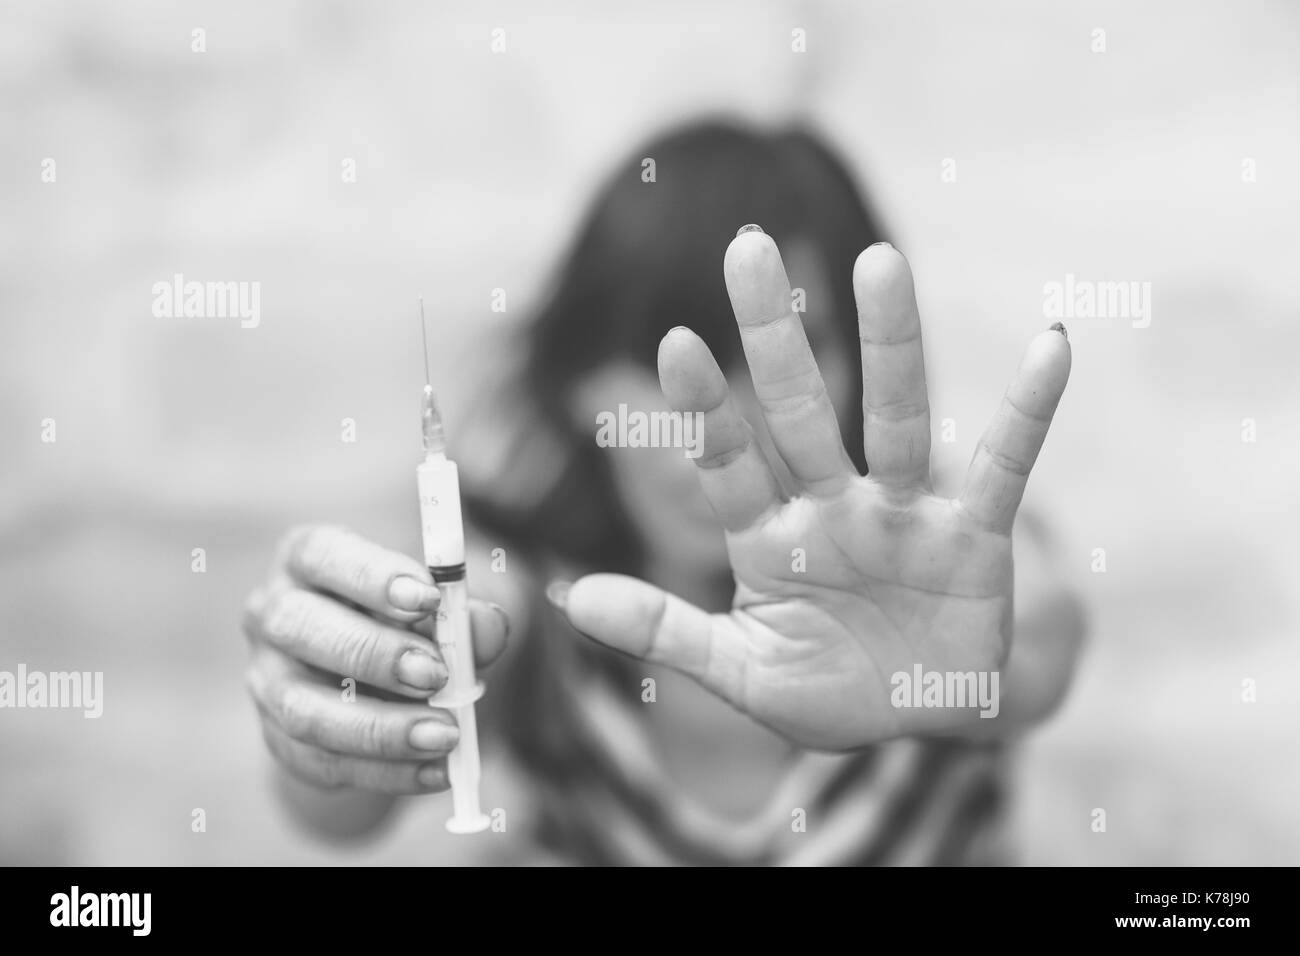 Drug addict young woman with syringe in action, Drug abuse concept. Stock Photo